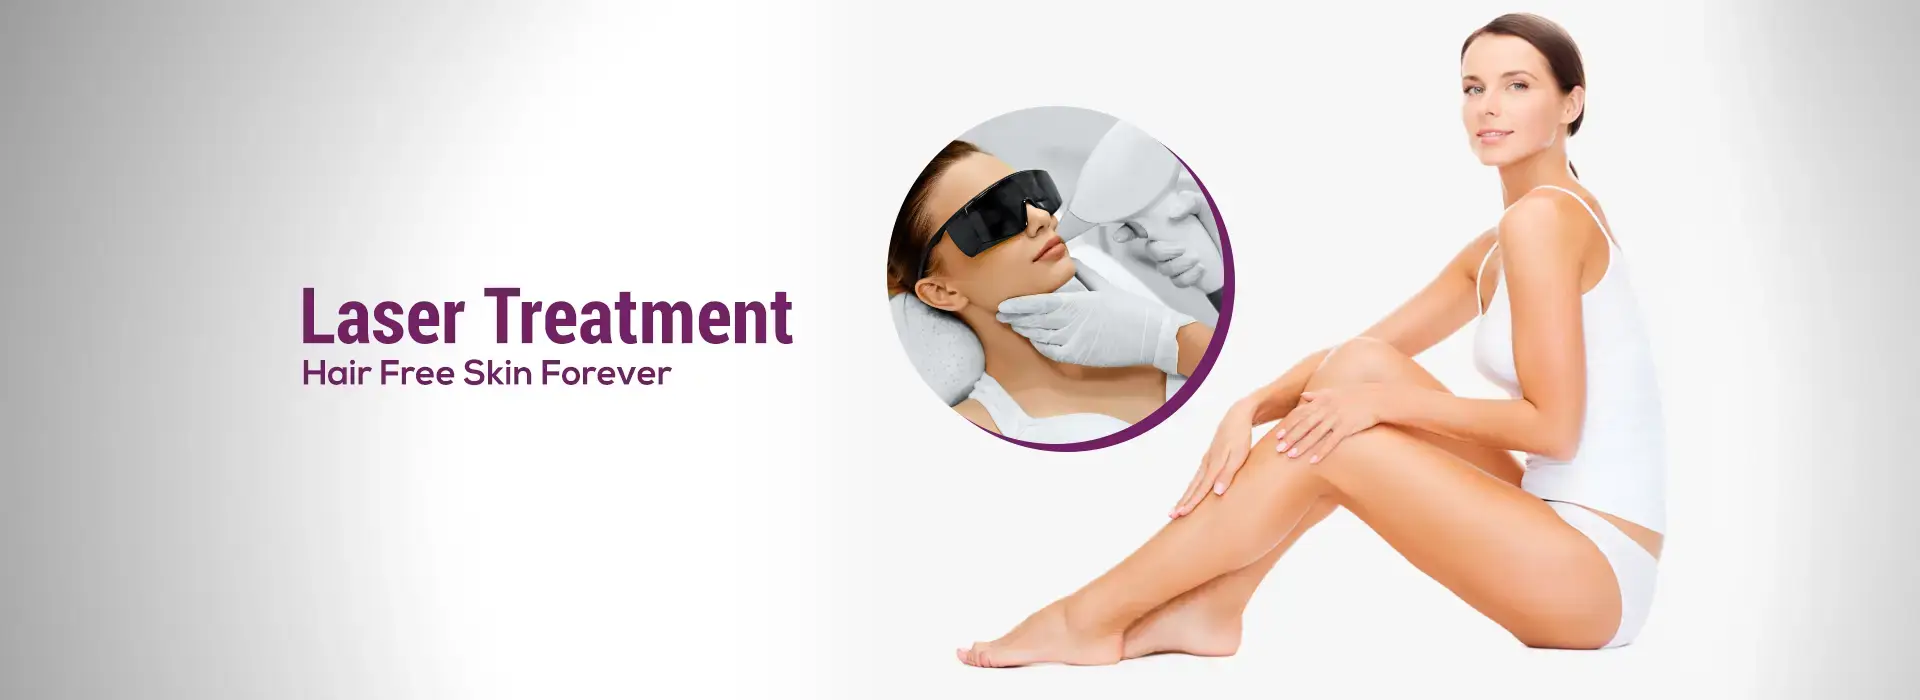 Laser Hair Removal in Surat, Best Laser Hair Removal Clinic